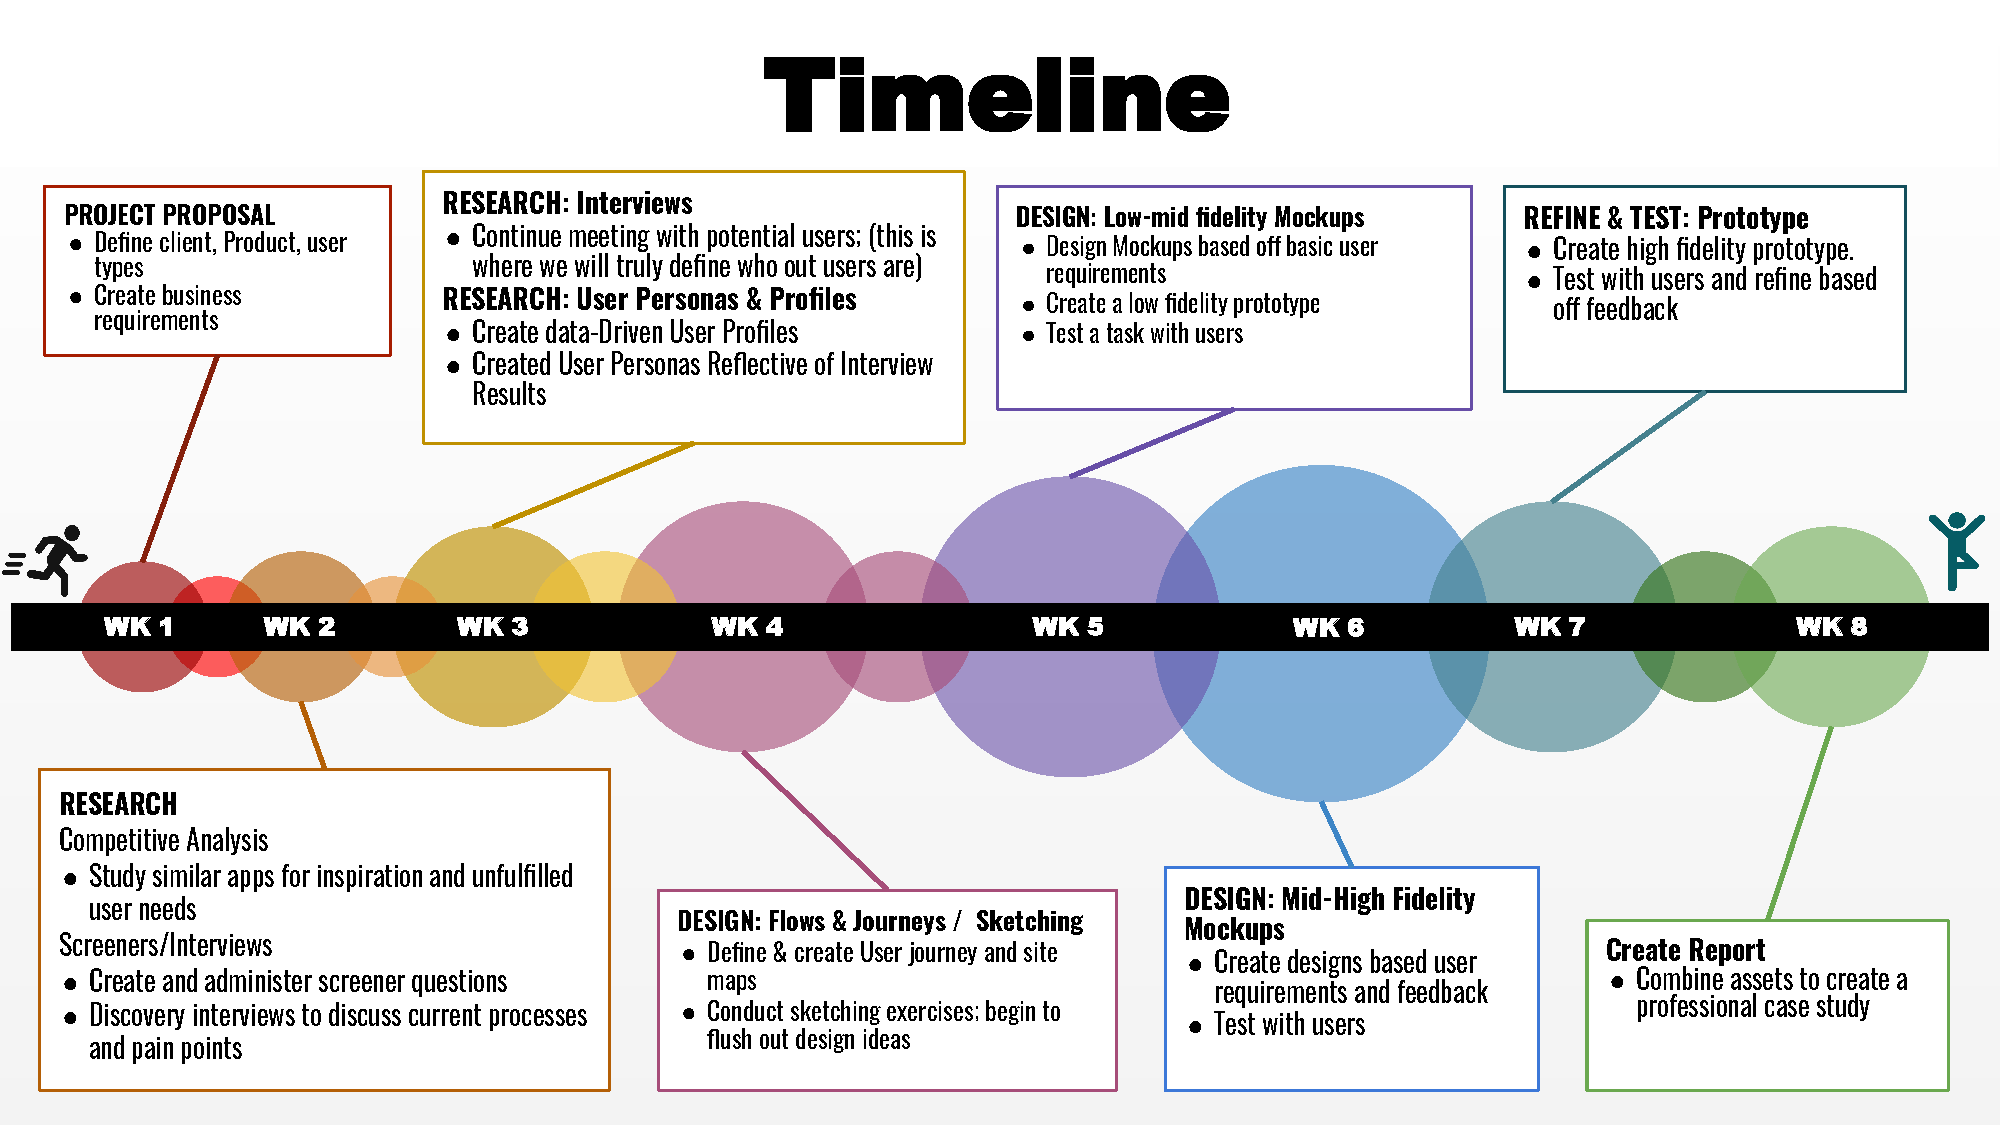 The 8 week project timeline